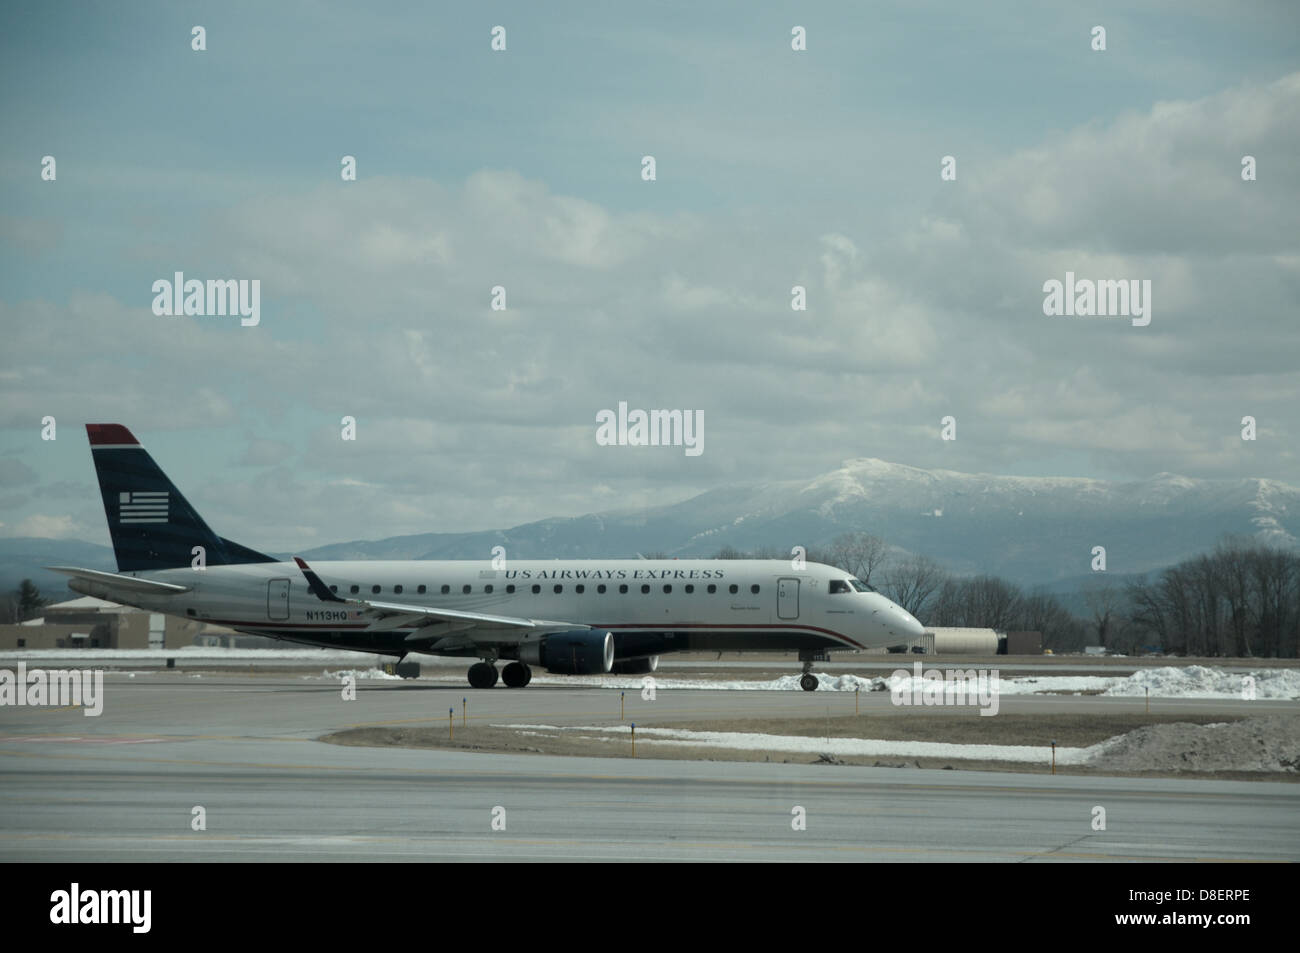 A U.S. Airways airplane taxies enroute to the gate at Burlington International Airport in Burlington, Vermont. Stock Photo